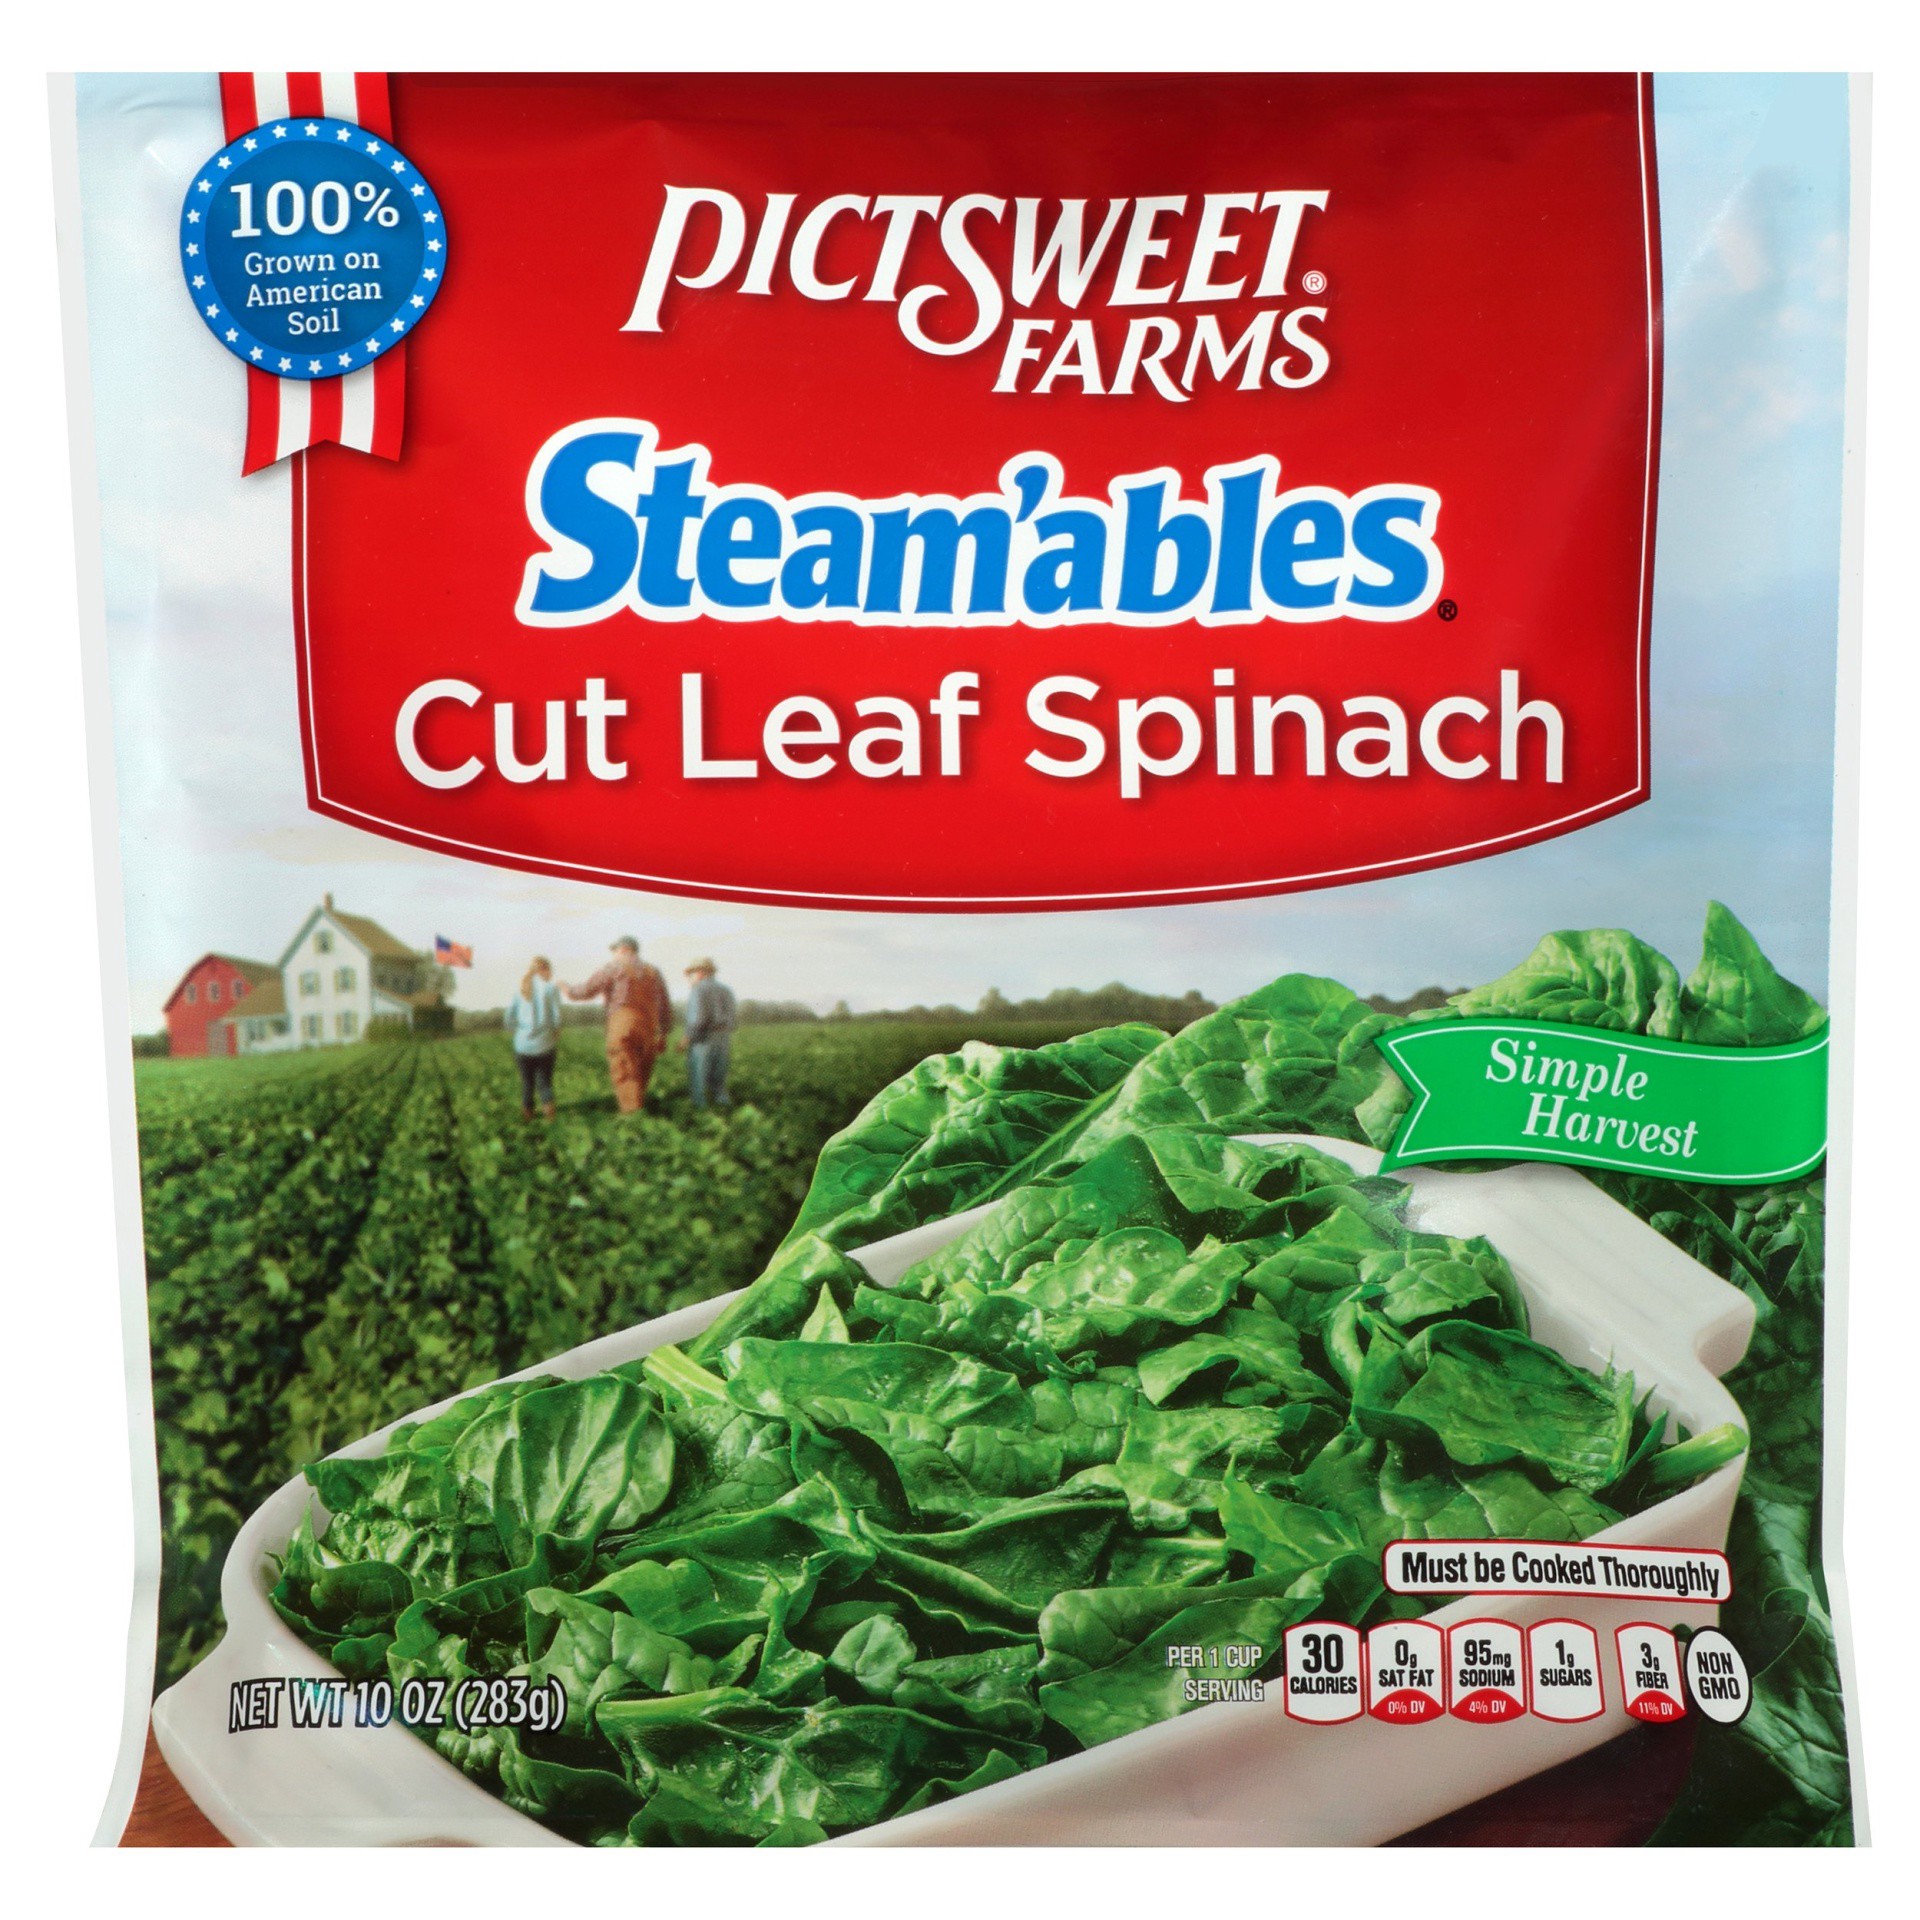 slide 1 of 3, Pictsweet Farms Steam'ables Cut Leaf Spinach, Simple Harvest - 10 oz, 10 oz